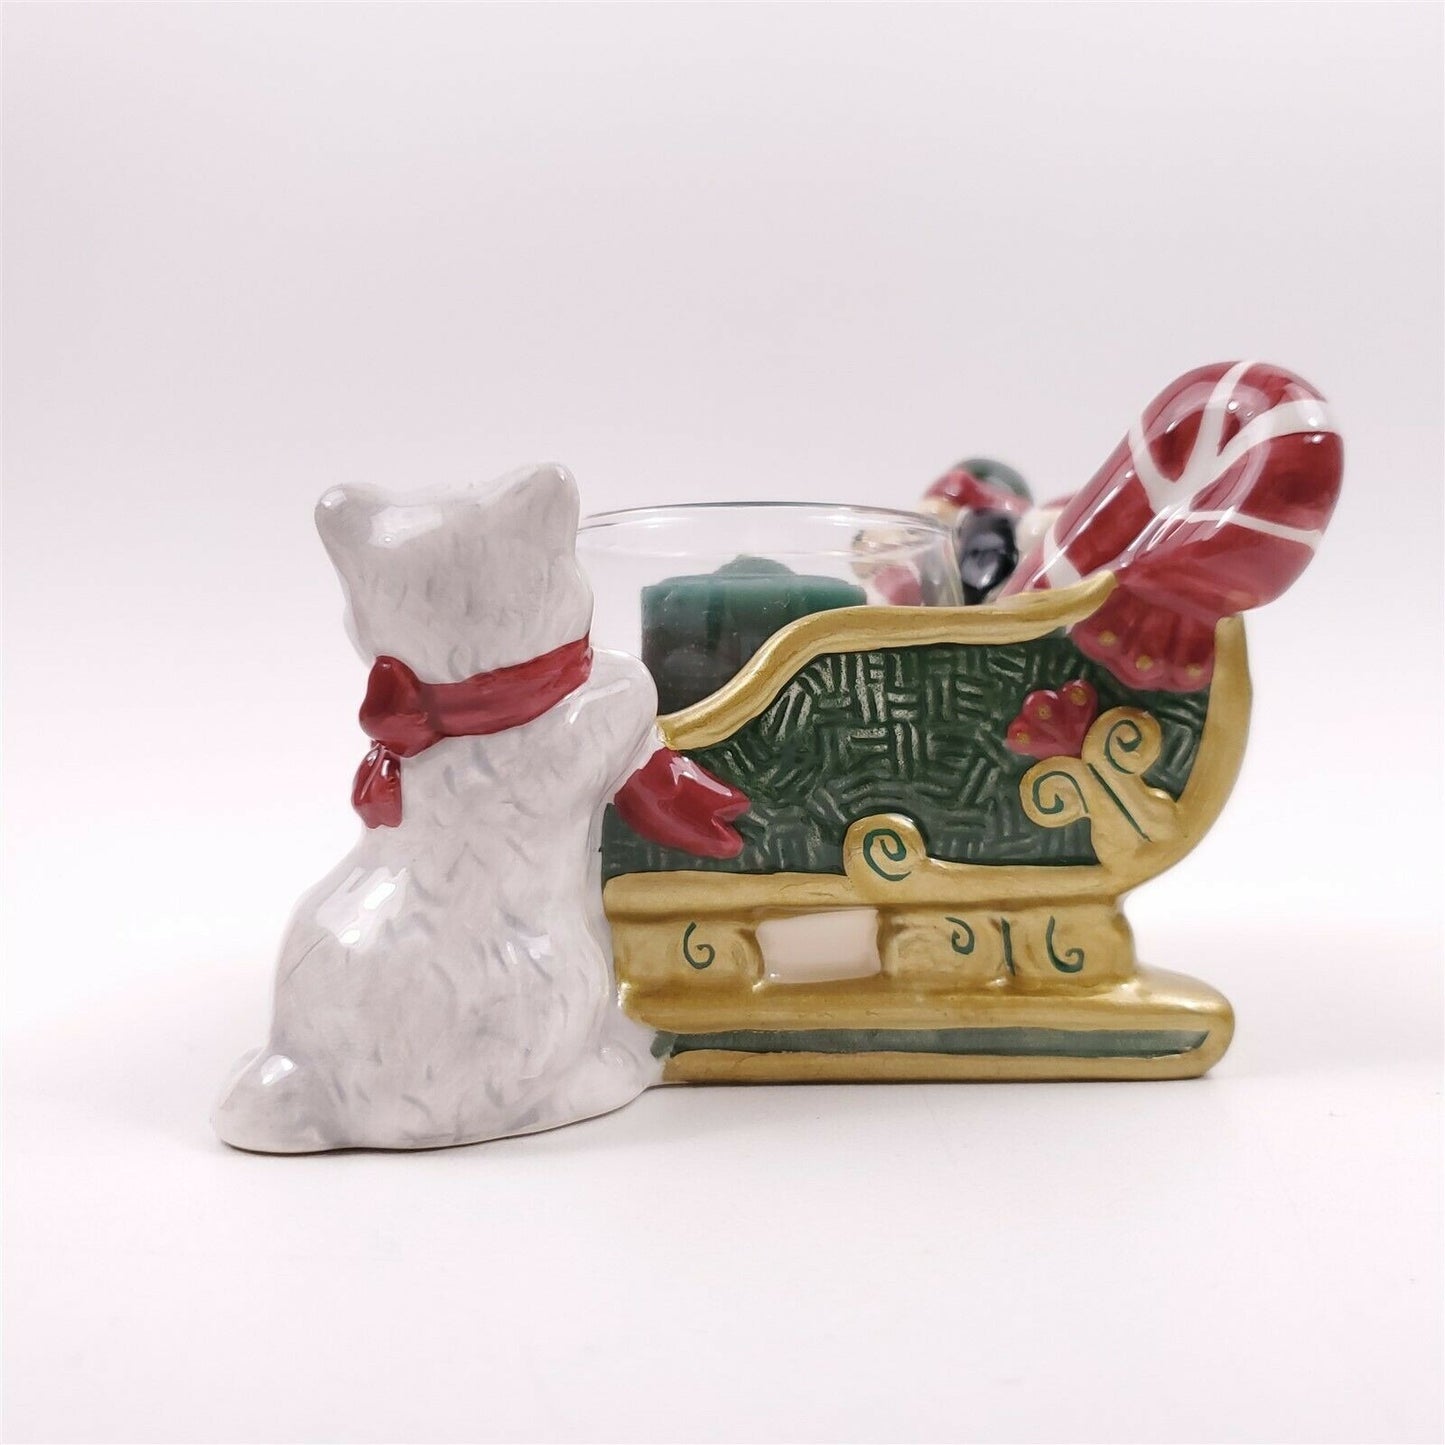 Home for the Holidays 96008 1997 May Dept. Stores Cat Dog Candy Cane w/ Box